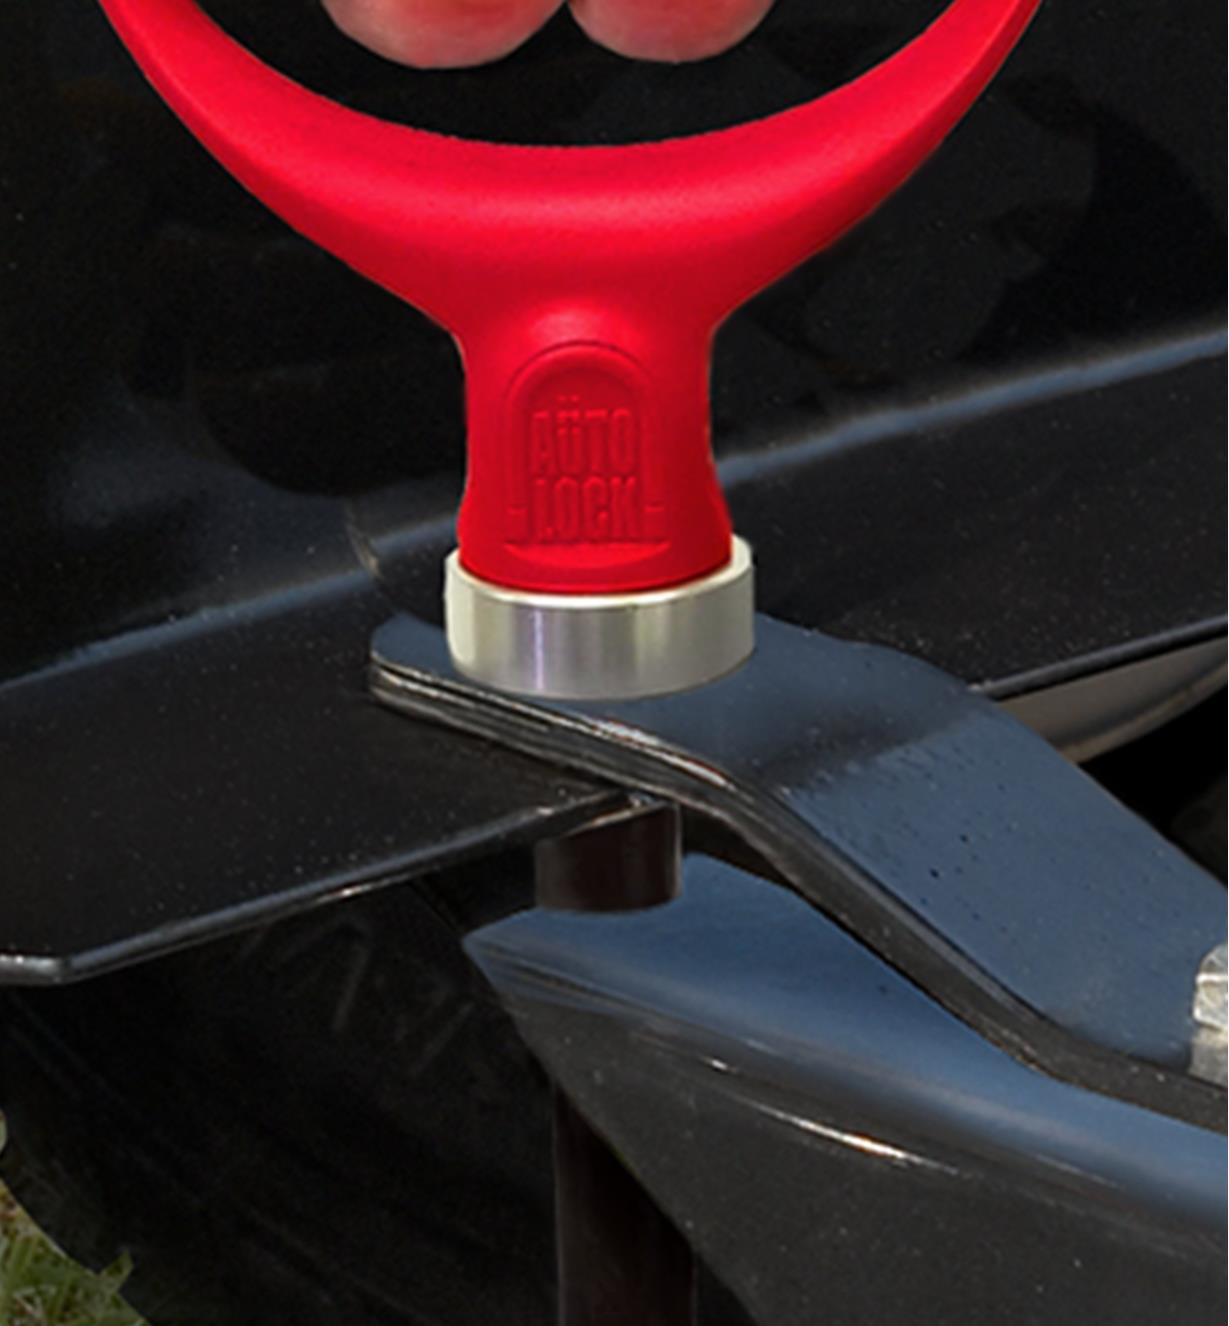 Close-up view of the magnet holding the magnetic hitch pin in the hitch